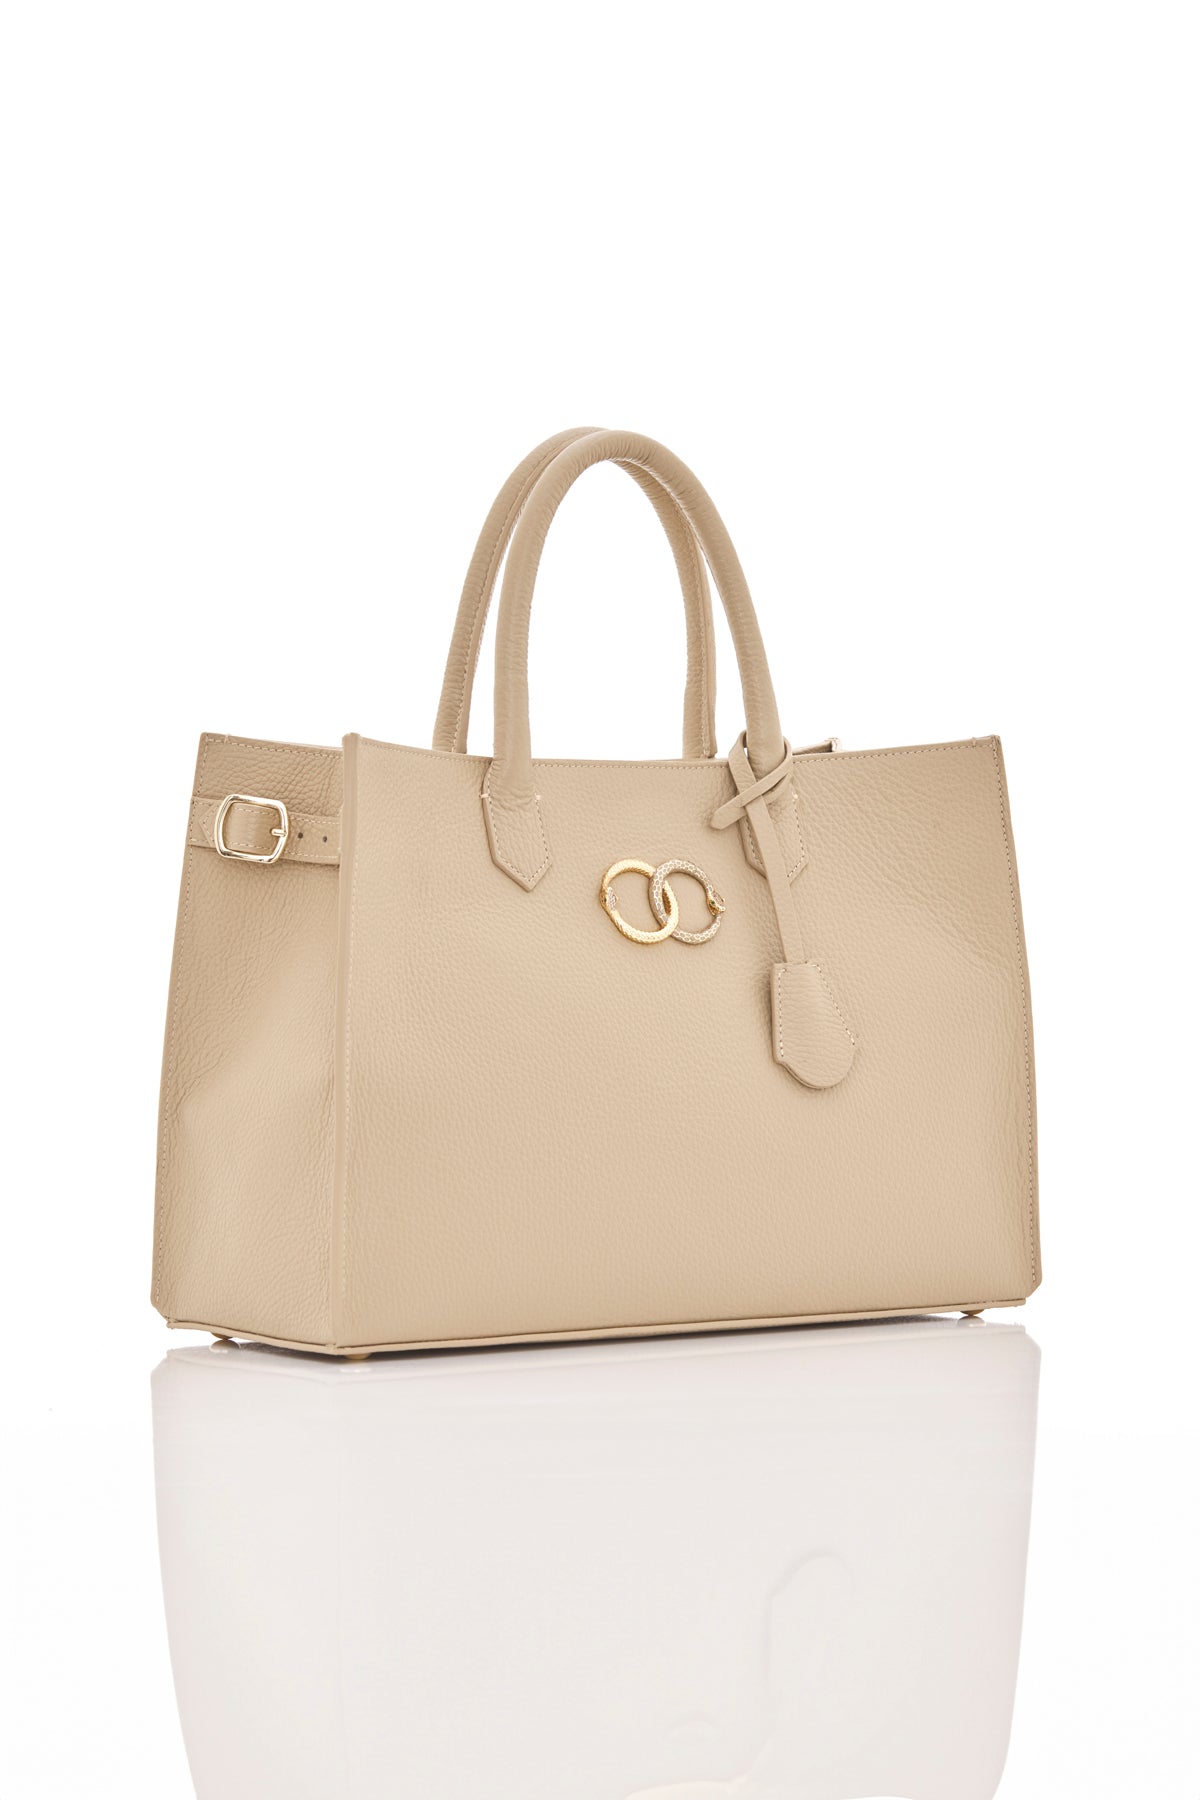 beige sand ouroboros genuine leather women's tote bag side